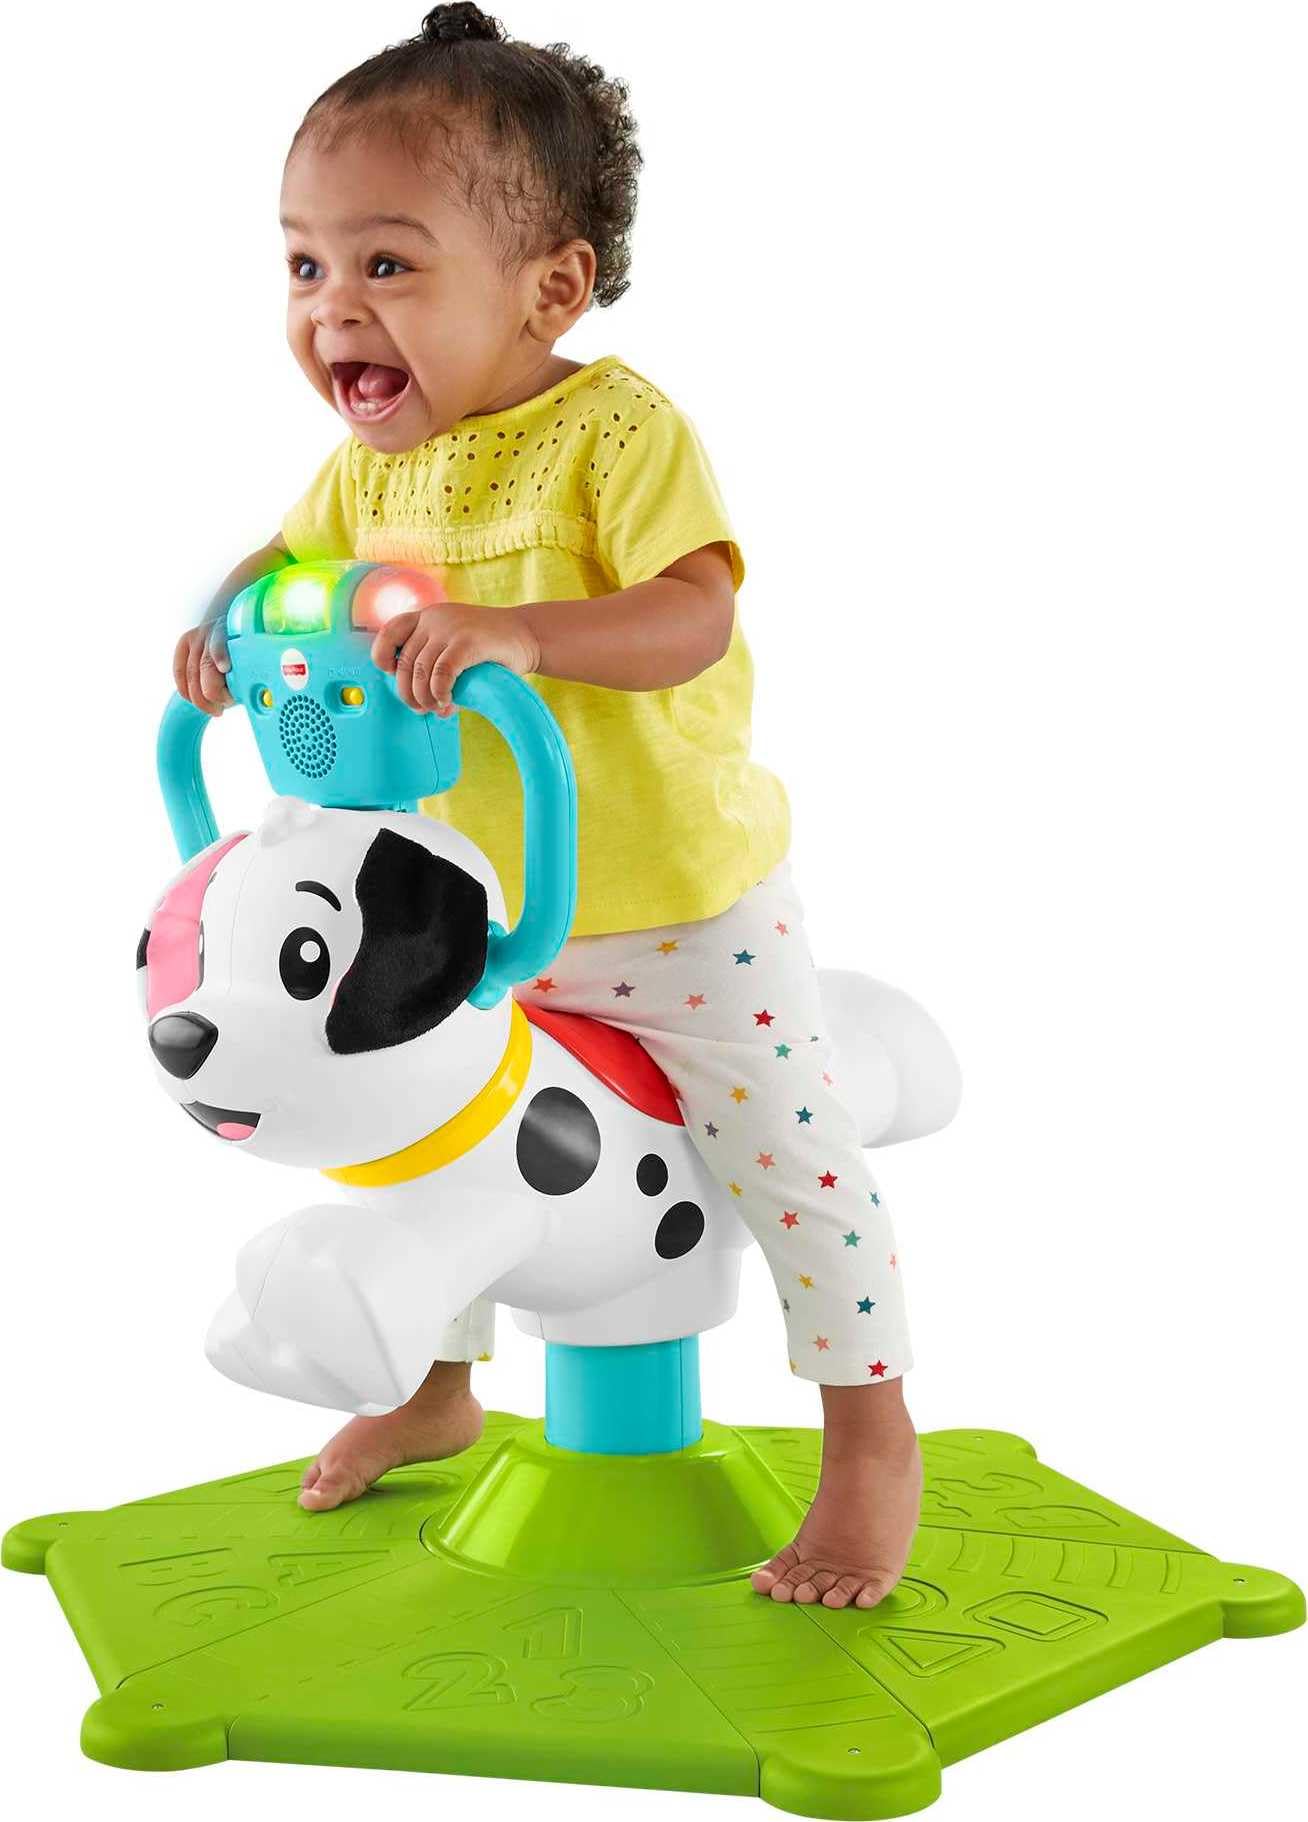 Fisher-Price Toddler Ride-On Learning Toy, Bounce and S...